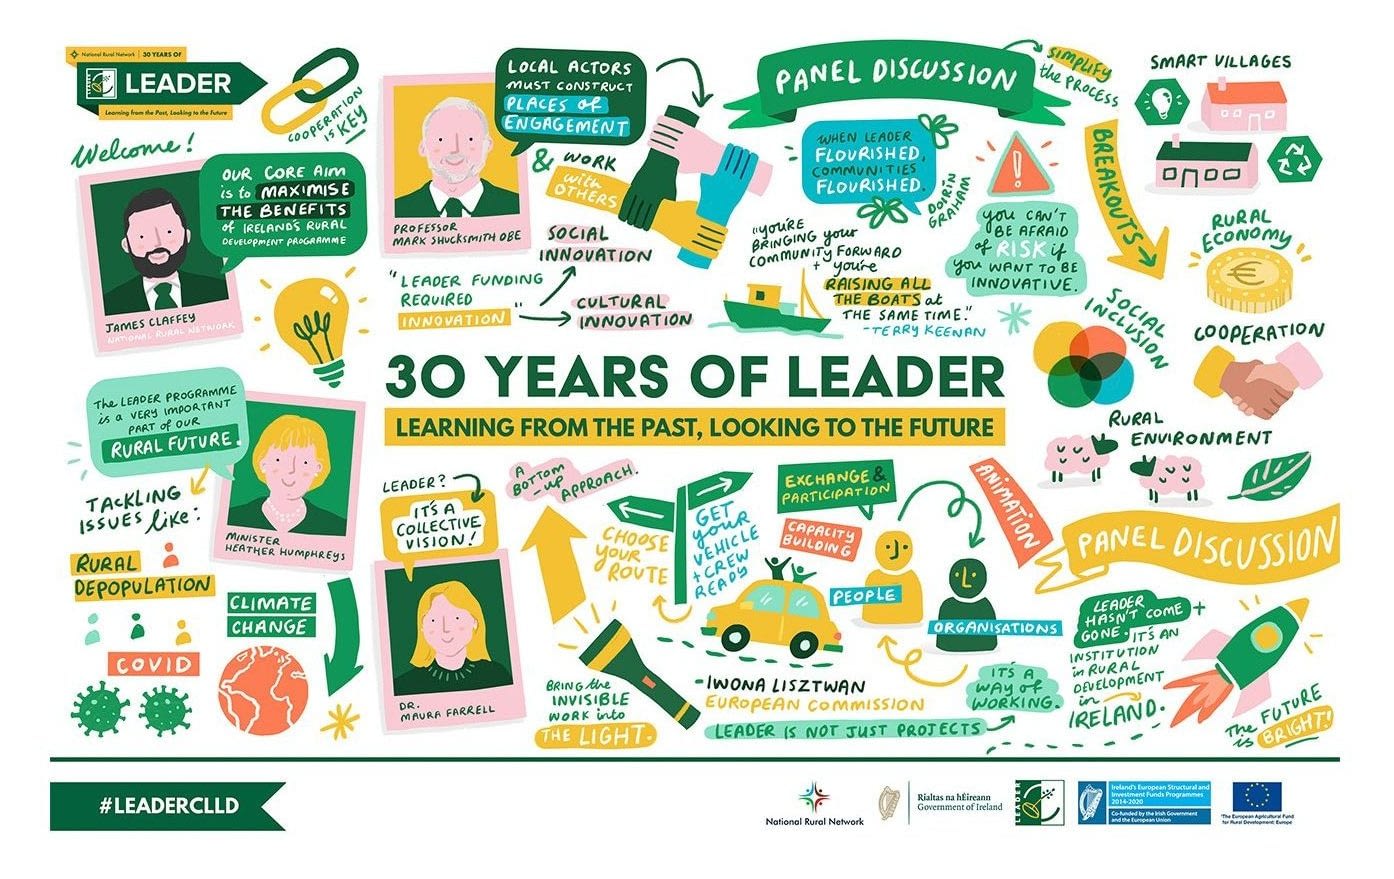 Two colourful examples of graphic recording by illustrator Ruth Graham - one for a Leader and National Rural Network conference and one for an SPHE Network conference.